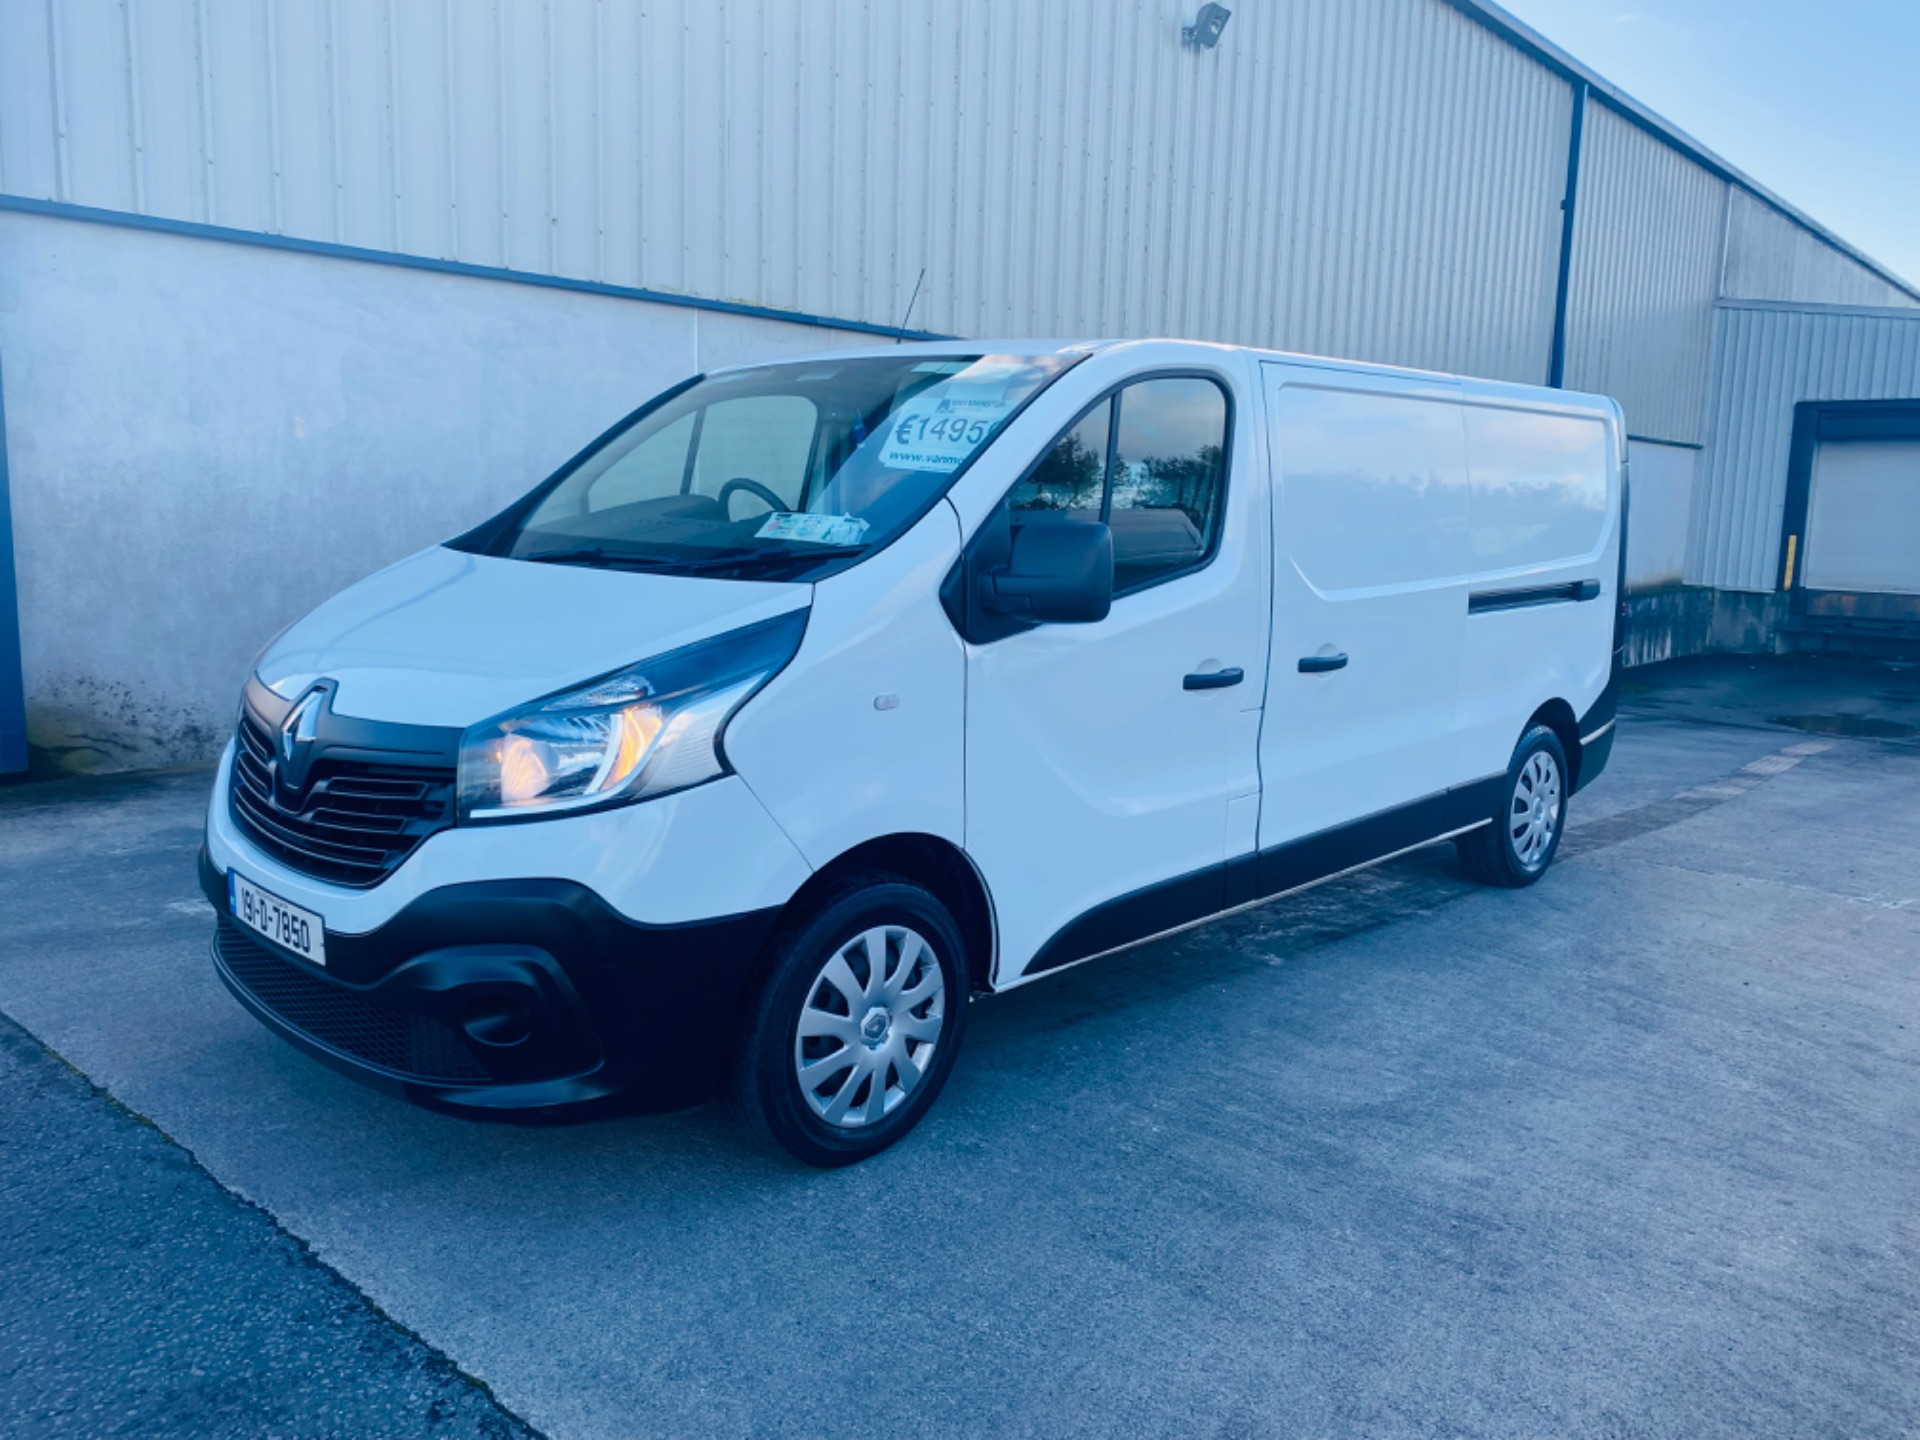 2019 Renault Trafic LL29 DCI 120 Business (191D7850) Thumbnail 1